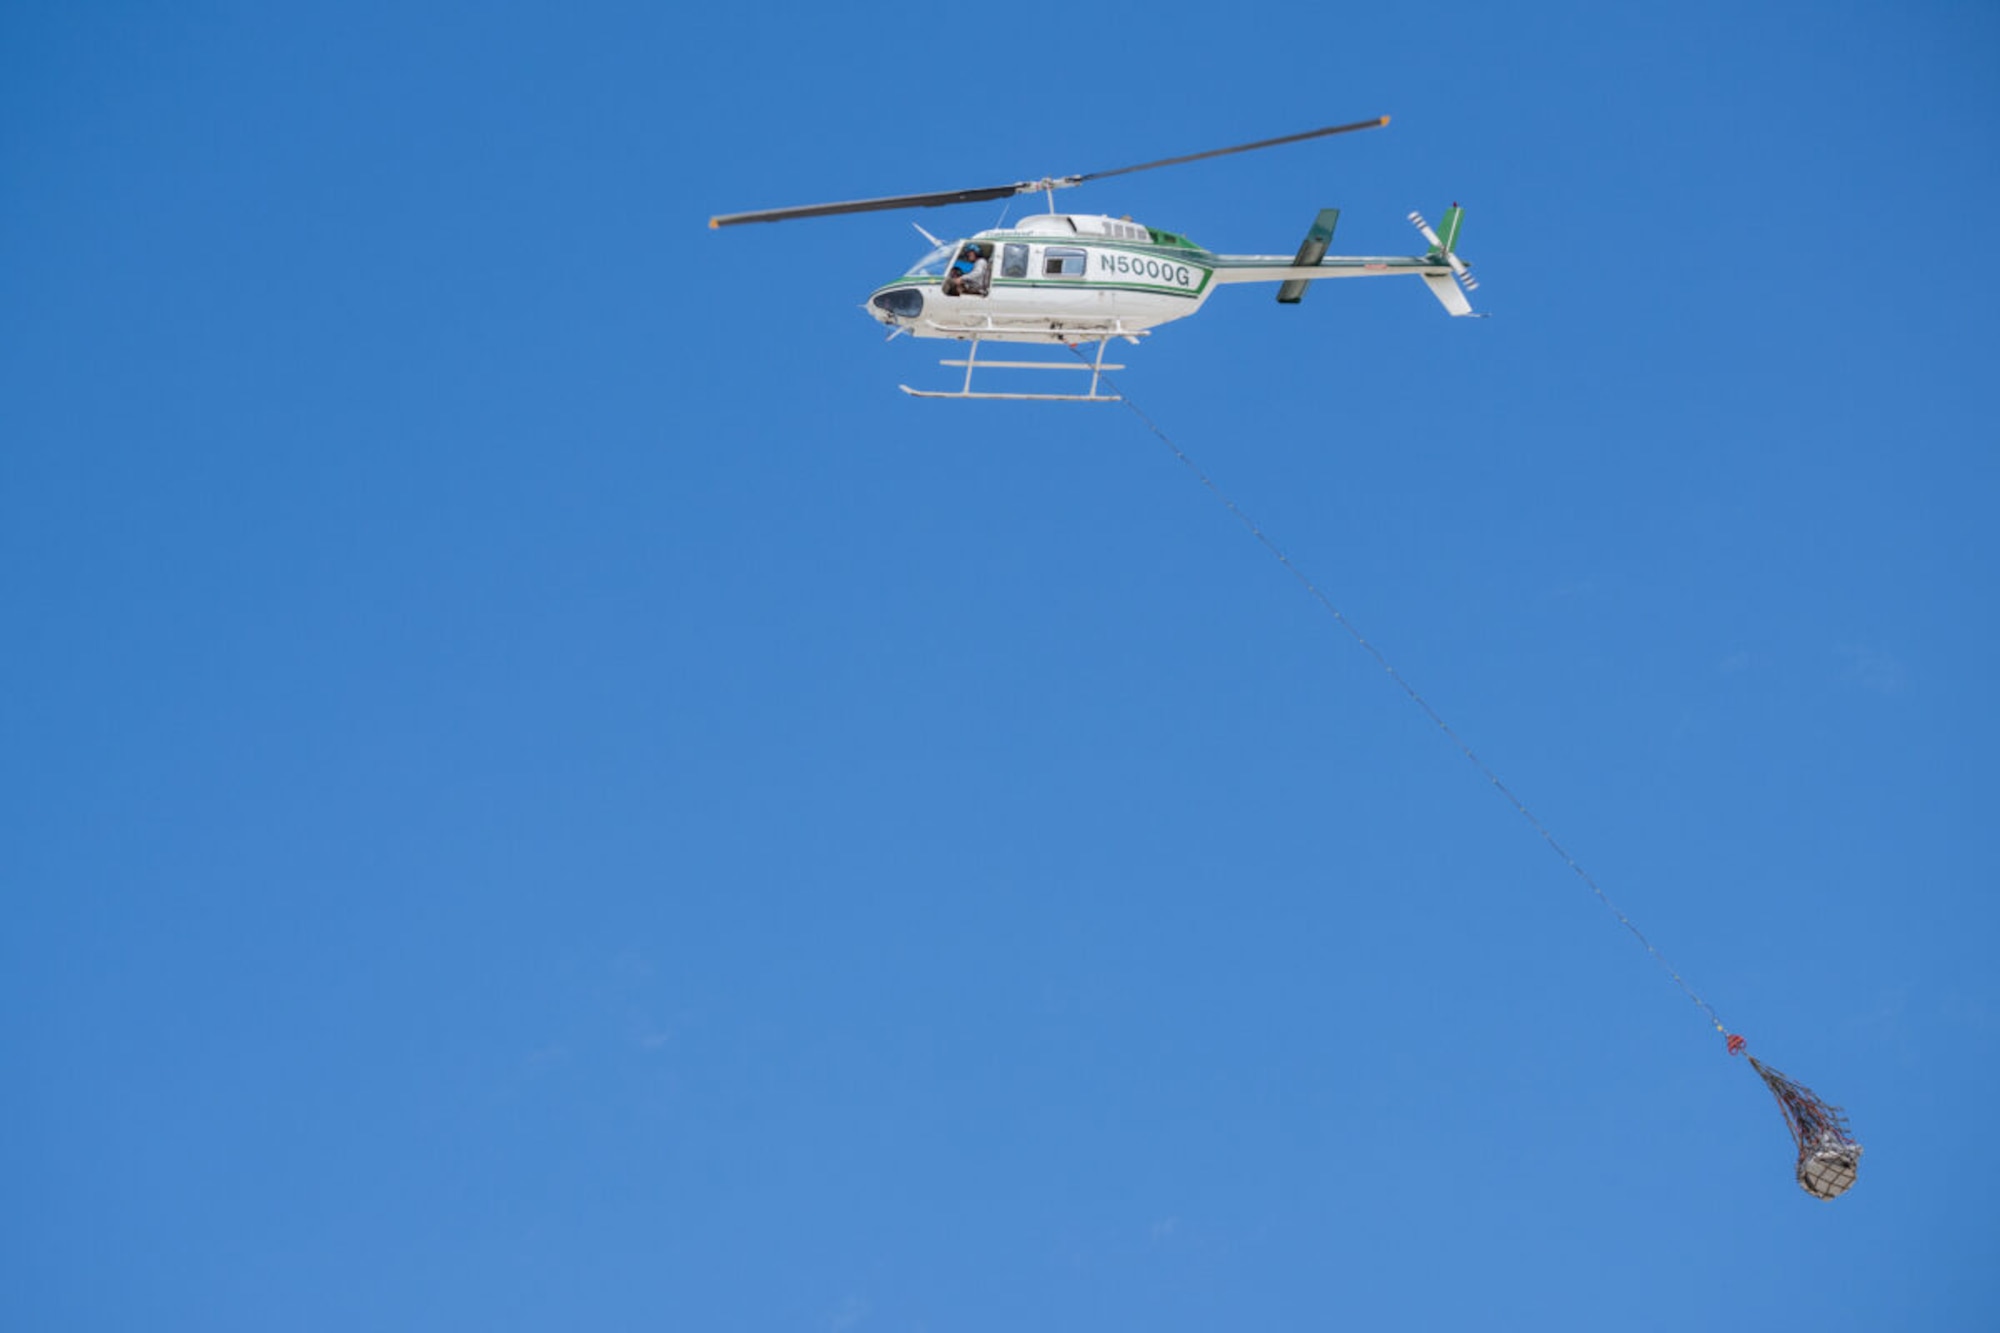 A photo of a helicopter carrying a capsule in a sling